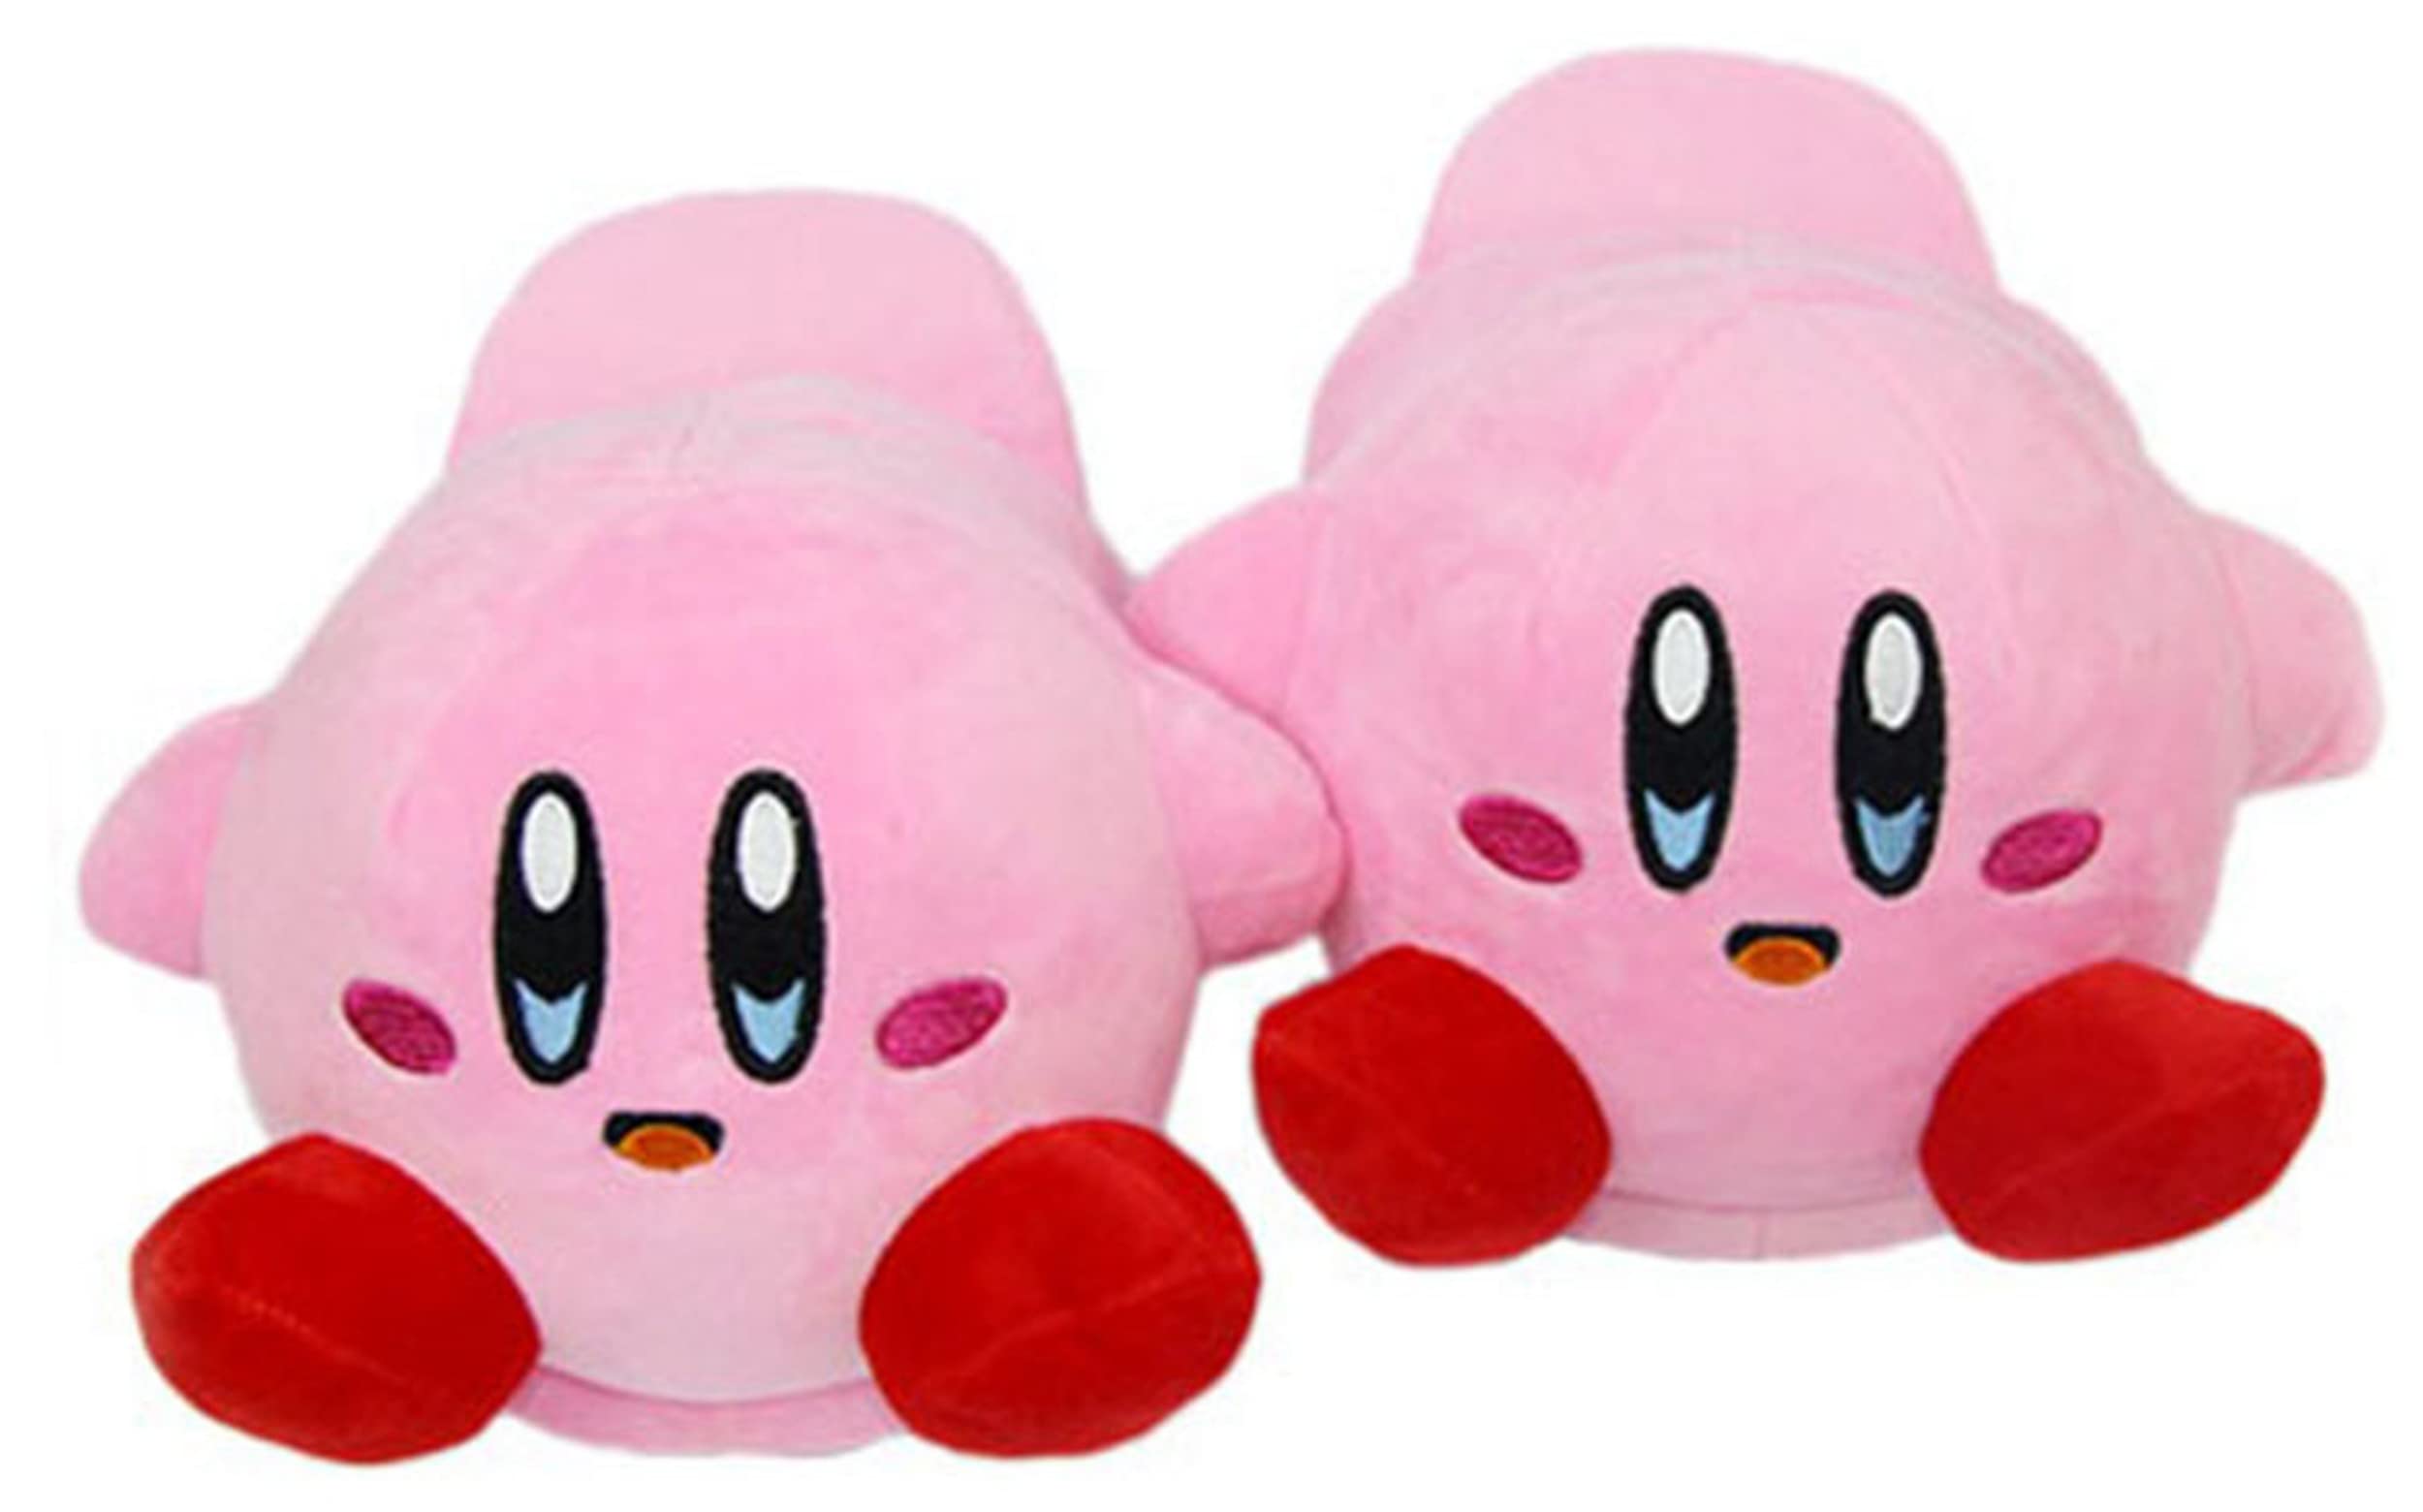 Roffatide Anime Kirby Cute Plush Open Back Floor Slippers Indoor Shoes Fuzzy Slippers with Rubber Sole for Women Pink